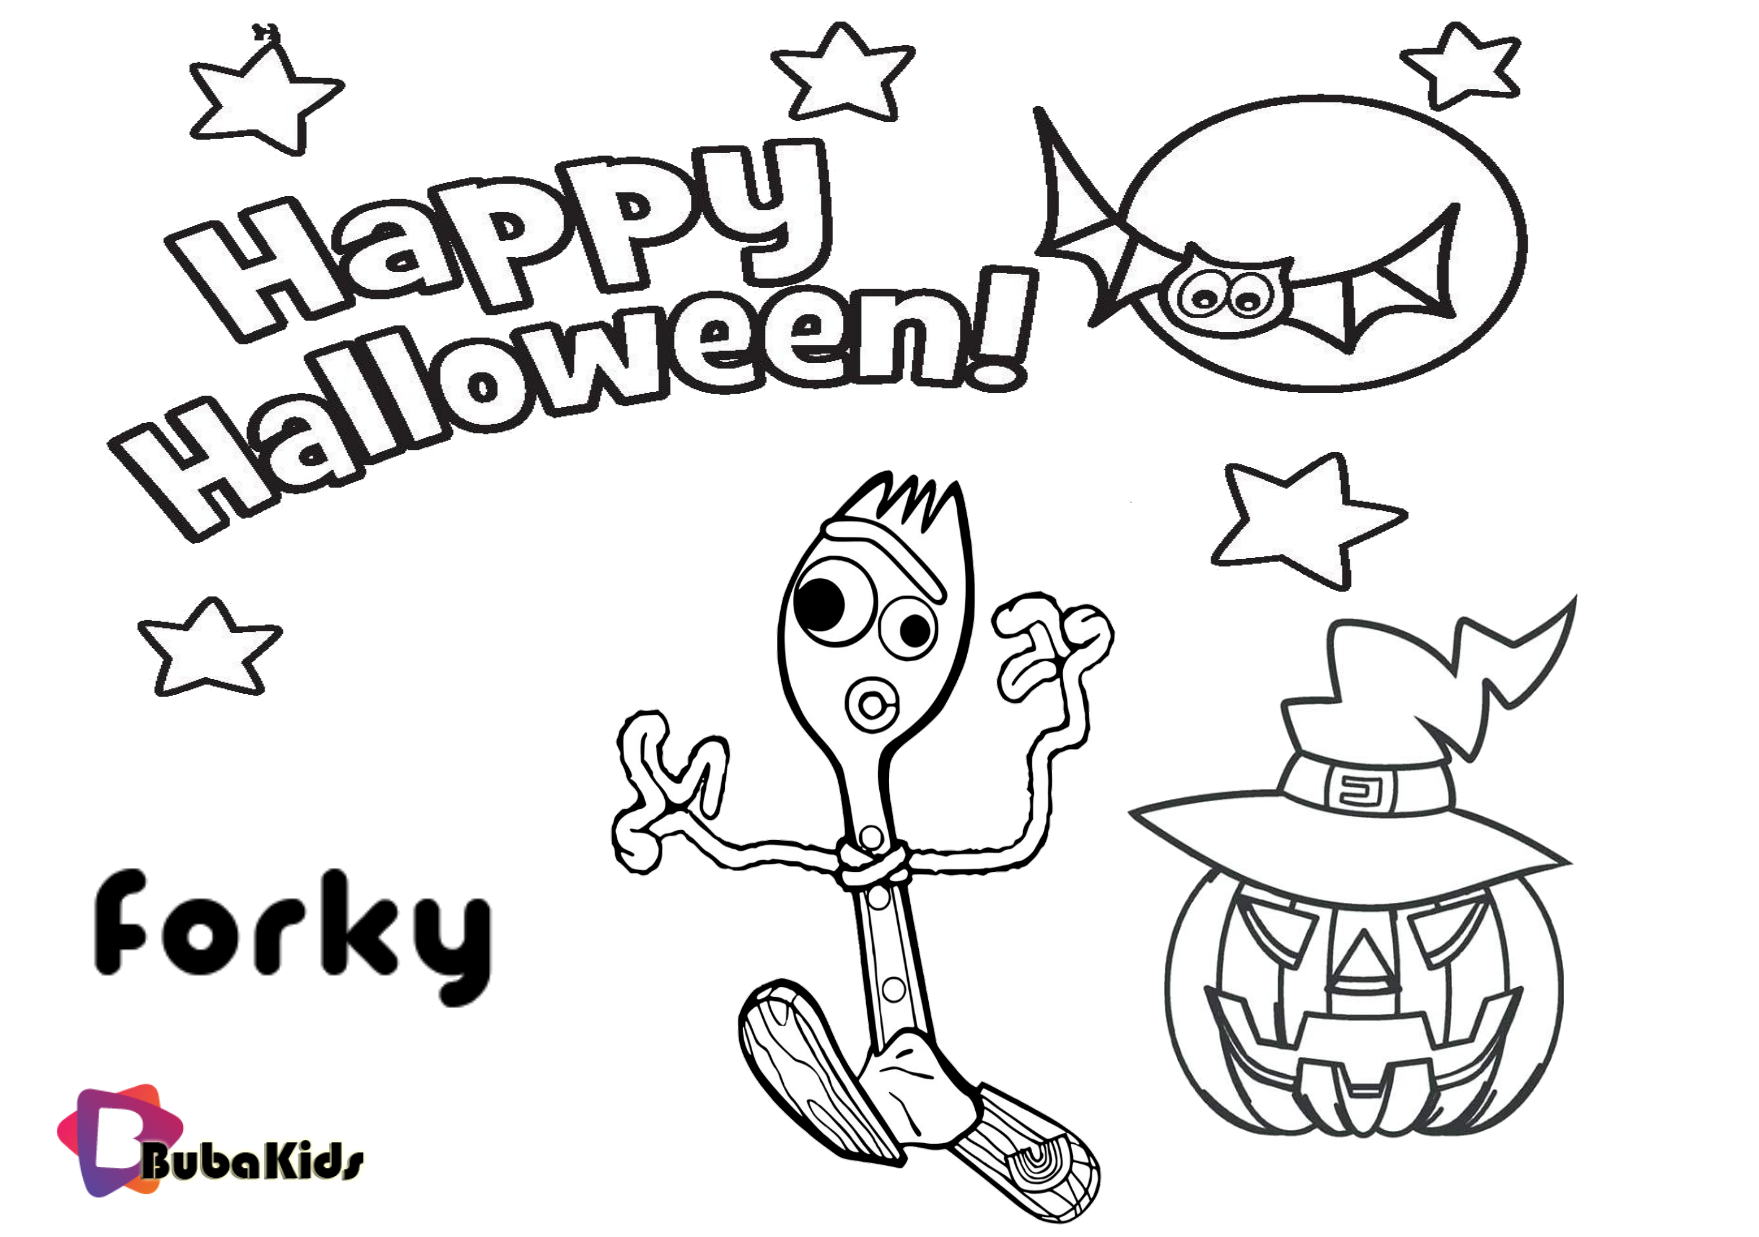 Forky Toy story 4 Happy Halloween 2019 printable coloring page. Wallpaper